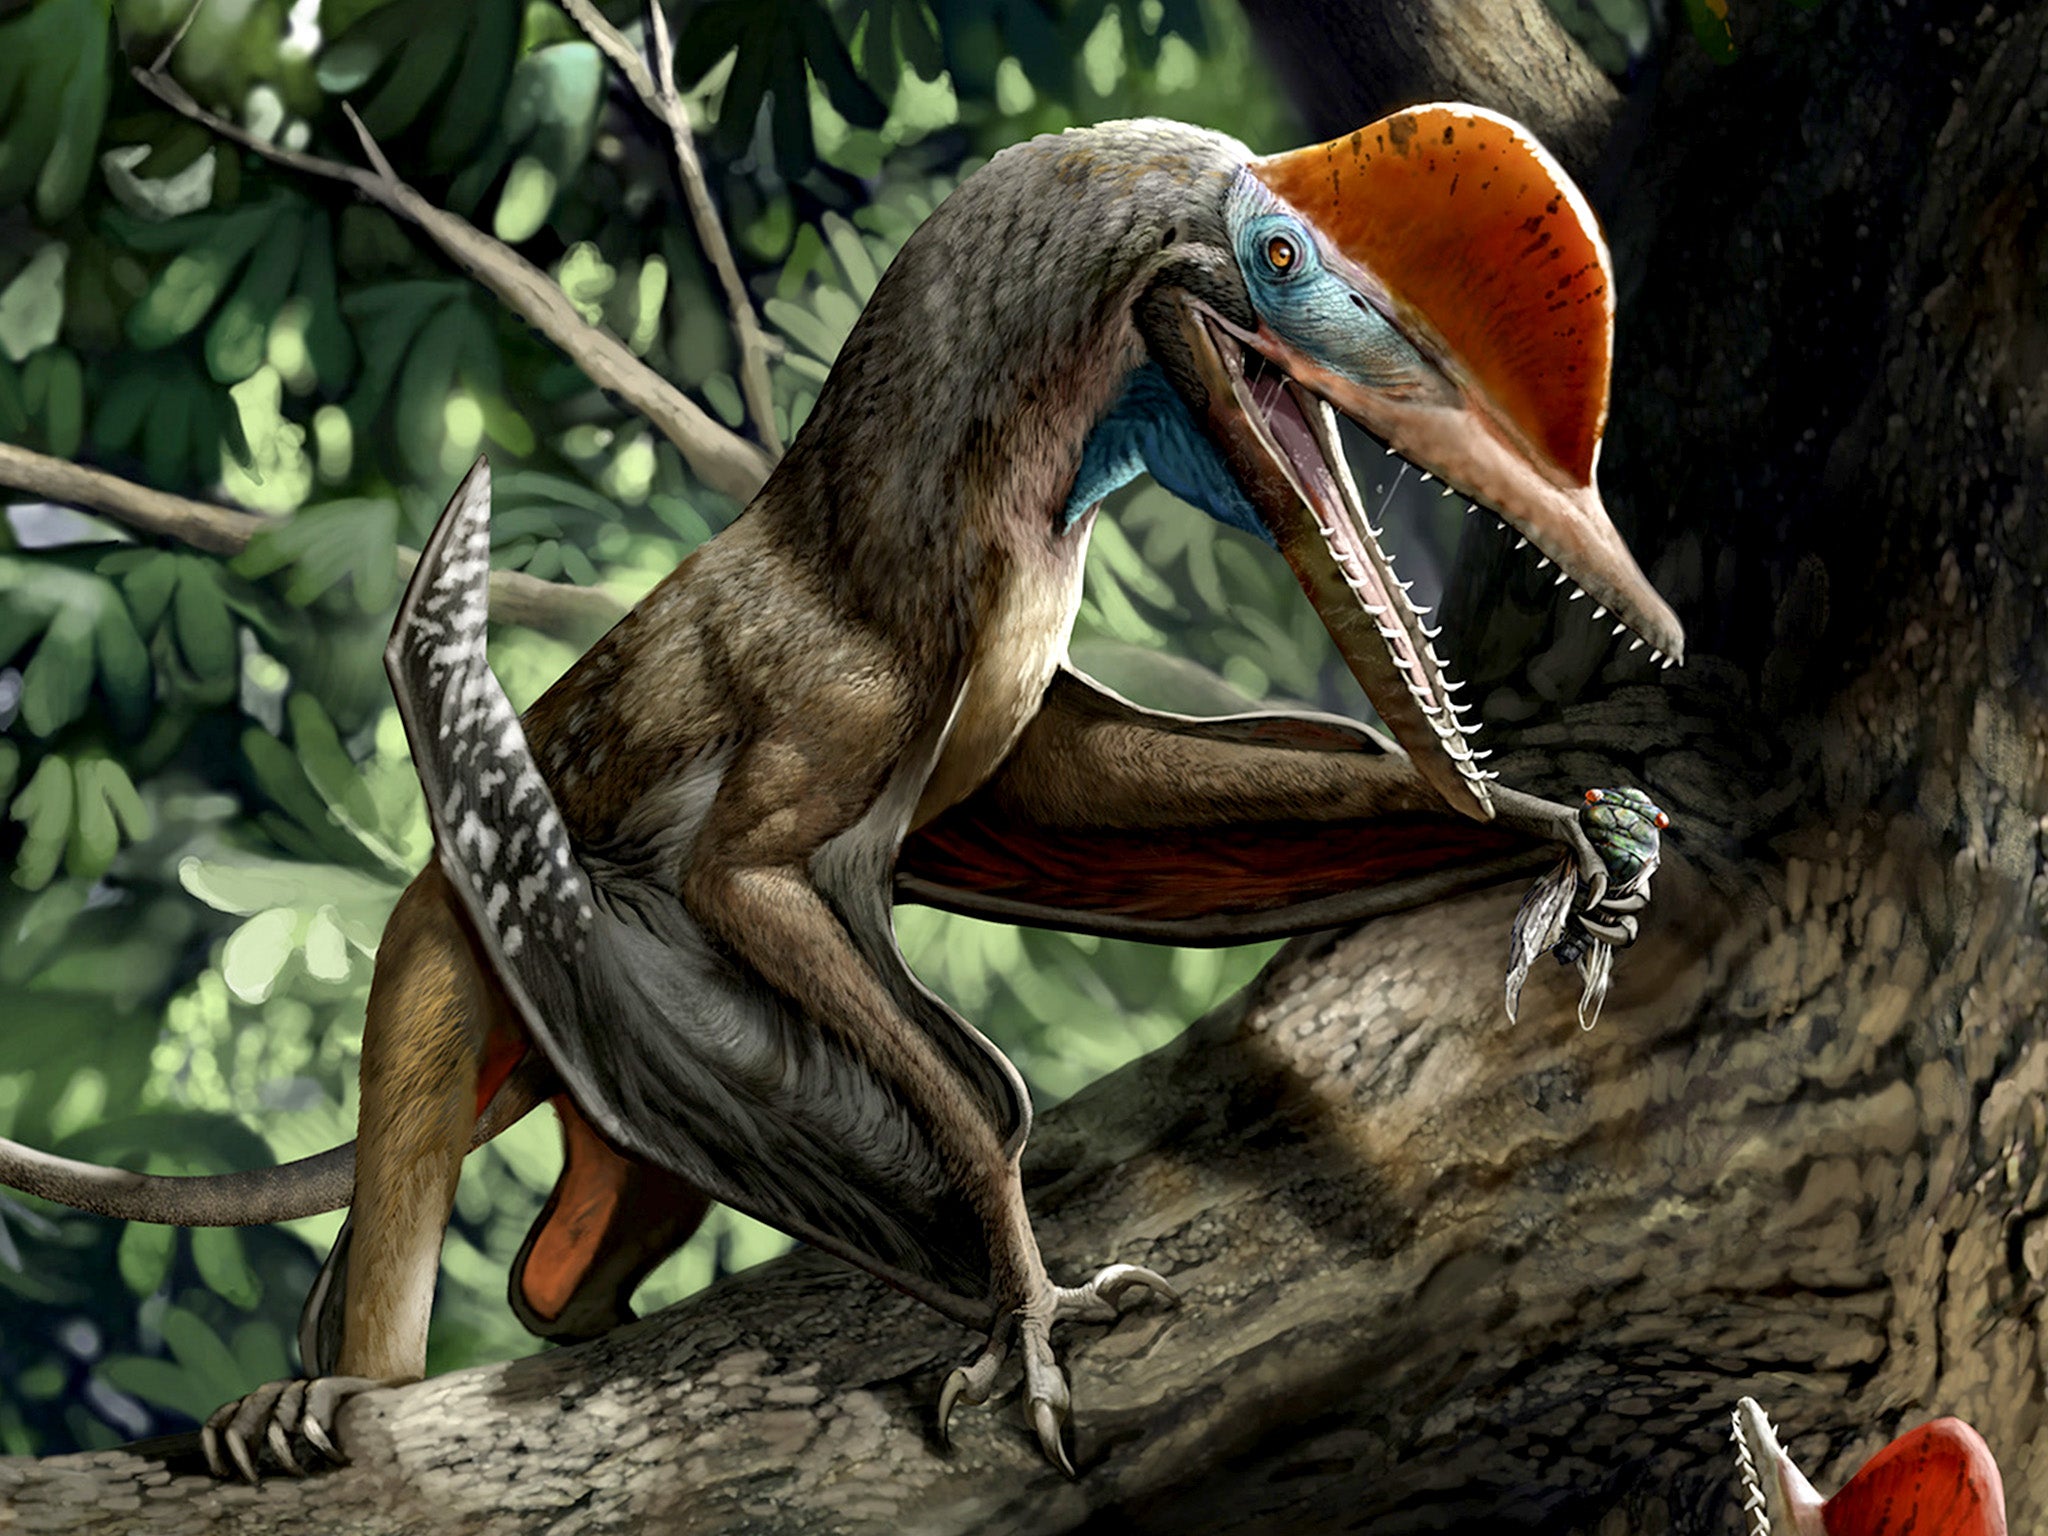 Monkeydactyl is thought to have hunted in the trees